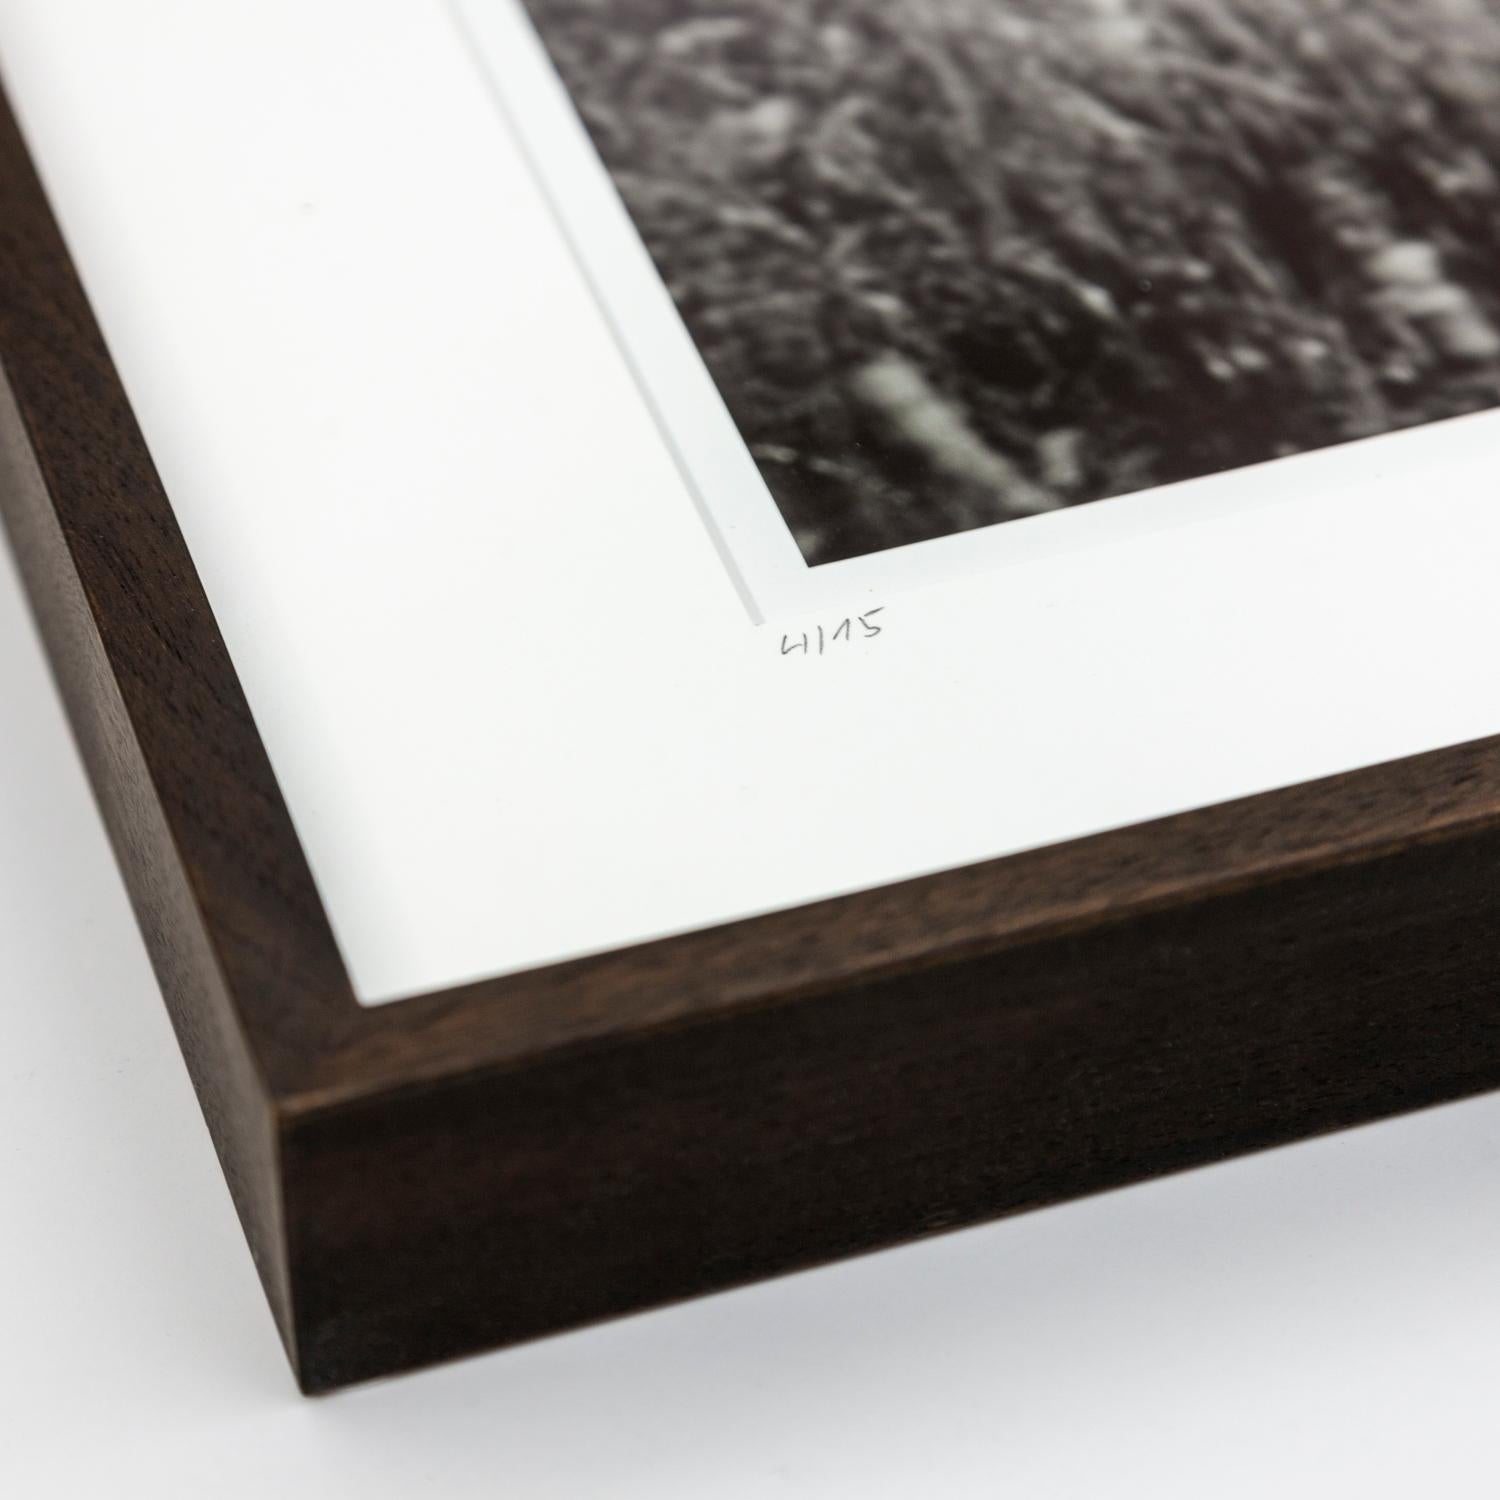 © Gerald Berghammer - Limited Edition 4/15
Silver Gelatin Prints, Selenium Toned, Printed 2020
Signed, numbered, dated by Artis.
Handmade wood frame, black, natural white archival Passepartout, anti-reflection white glass, UV 70, metal corners for